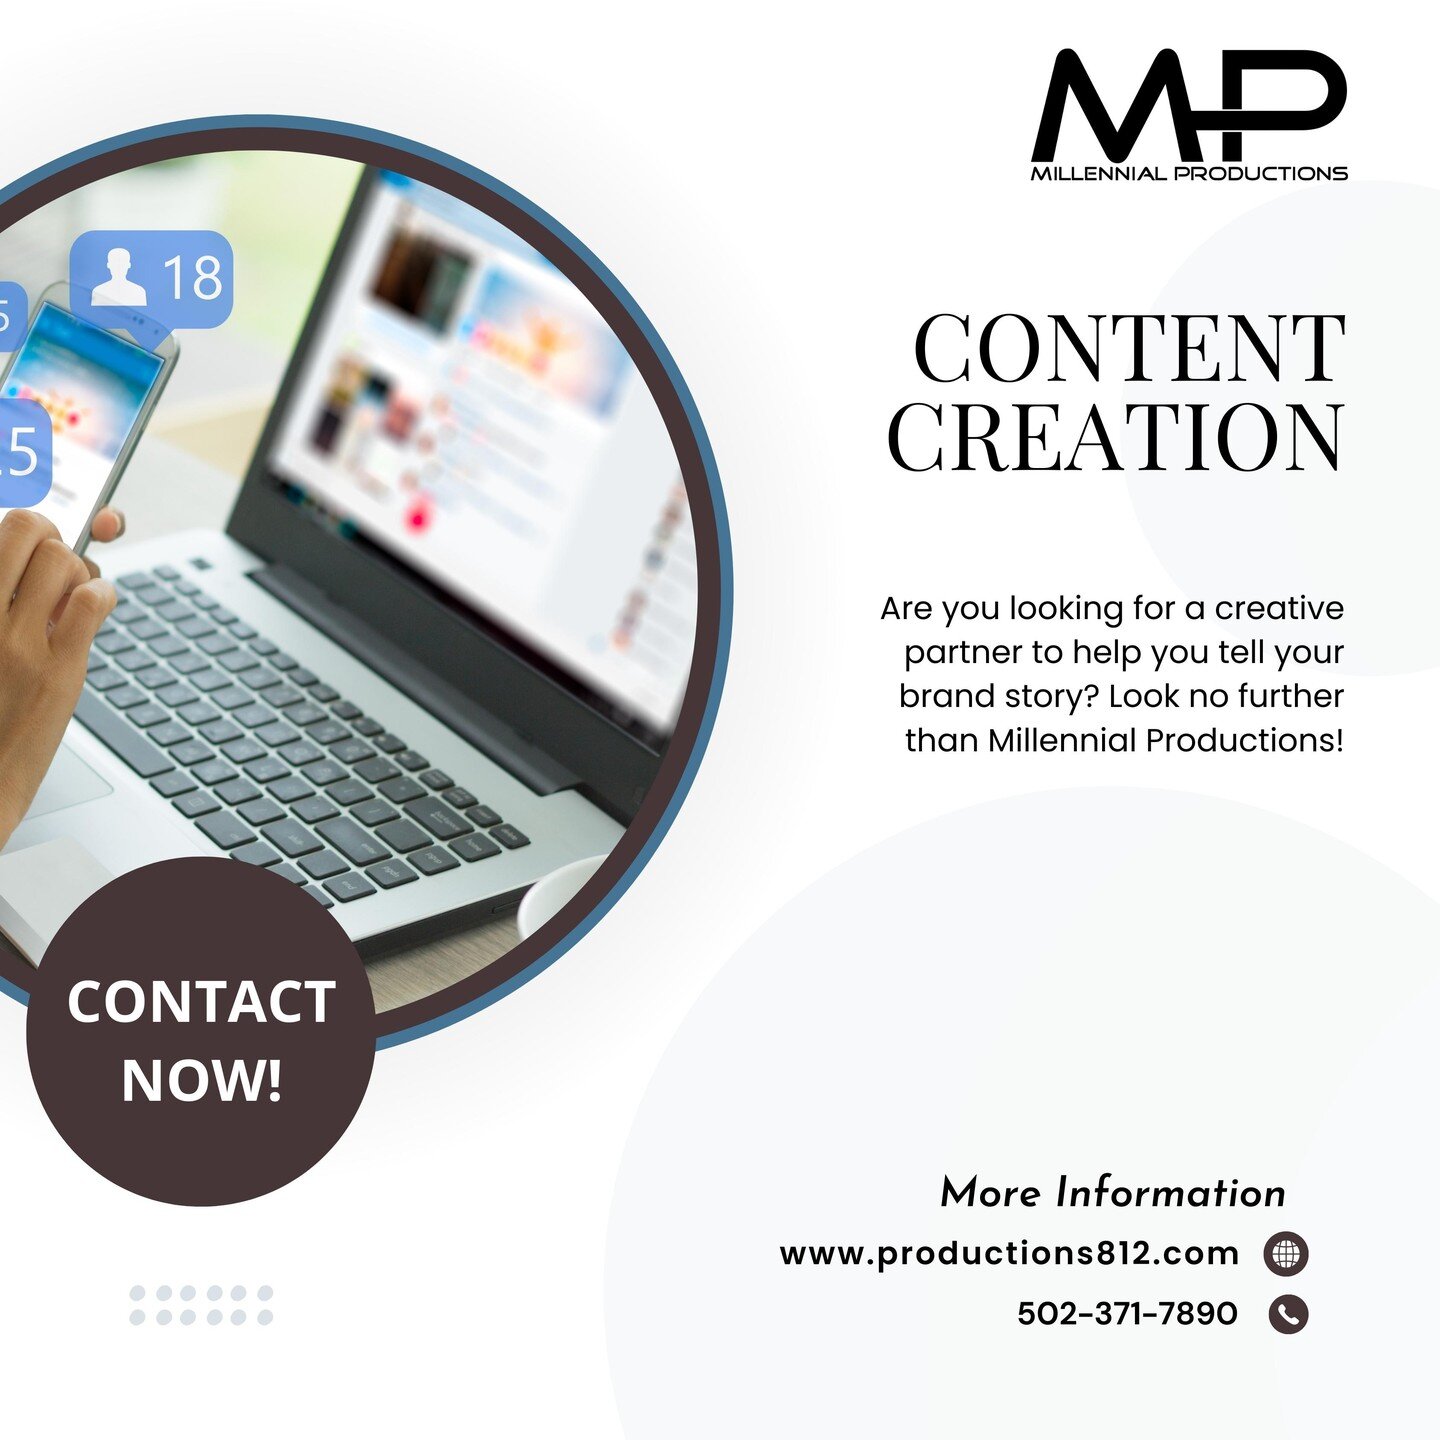 Video marketing is the future of digital advertising. At Millennial Productions, we specialize in creating videos that are tailored to your brand and target audience, ensuring that your message is heard loud and clear. Let's create something that tru